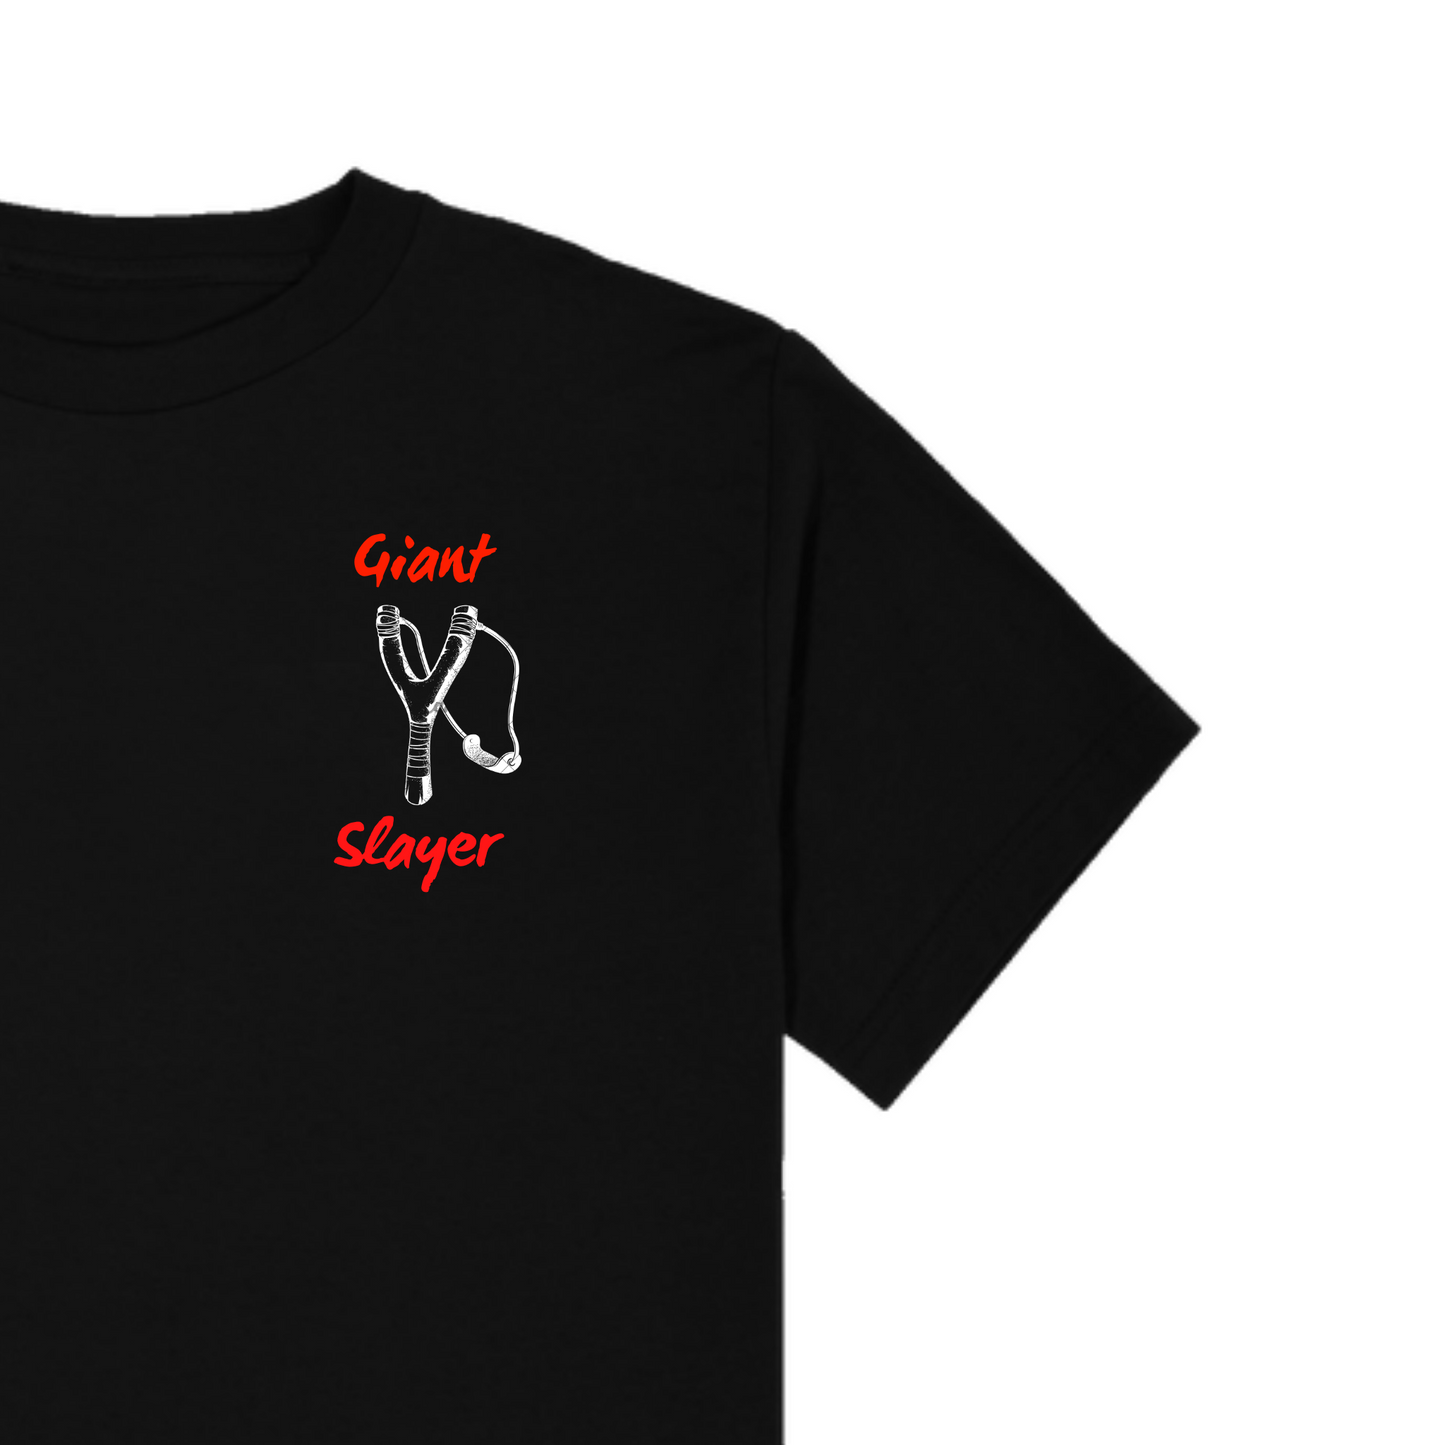 Giant Slayer Tshirt. Slingshot Tshirt by Crown of Favorr. David and Goliath Giant Slayer is written in bold letters. The Giant slayer t-shirt is black with red and white.  Giant Slayer Tshirt by Crown of Favor. Christian Clothing Brand. Christian Streetwear